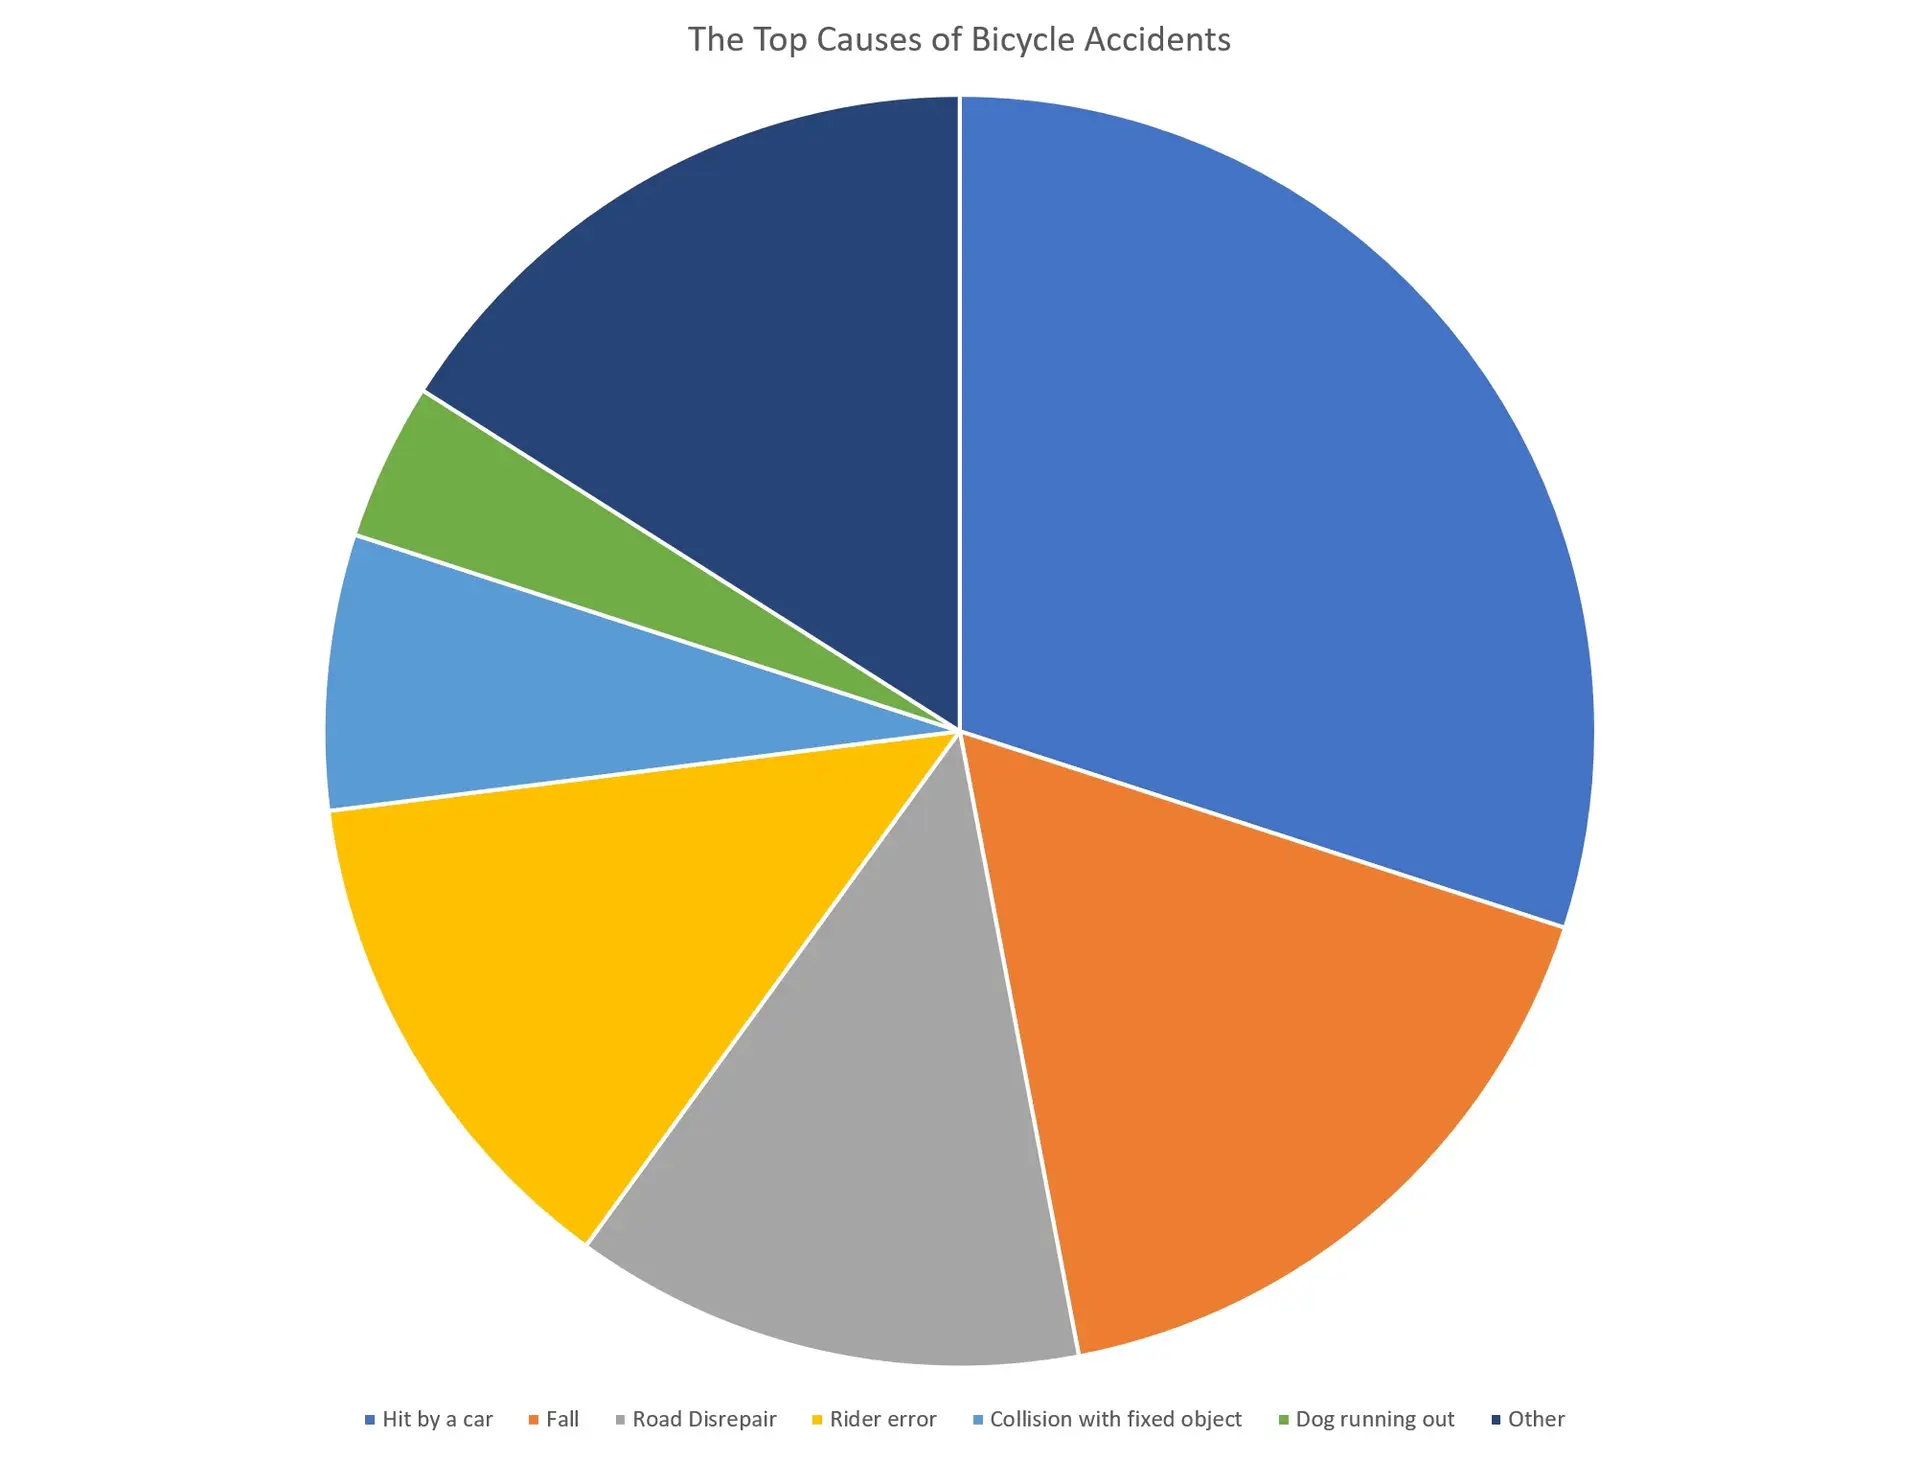 A pie chart showing the top causes of bicycle accidents. The most common cause is being hit by a car at 30% of all accidents.